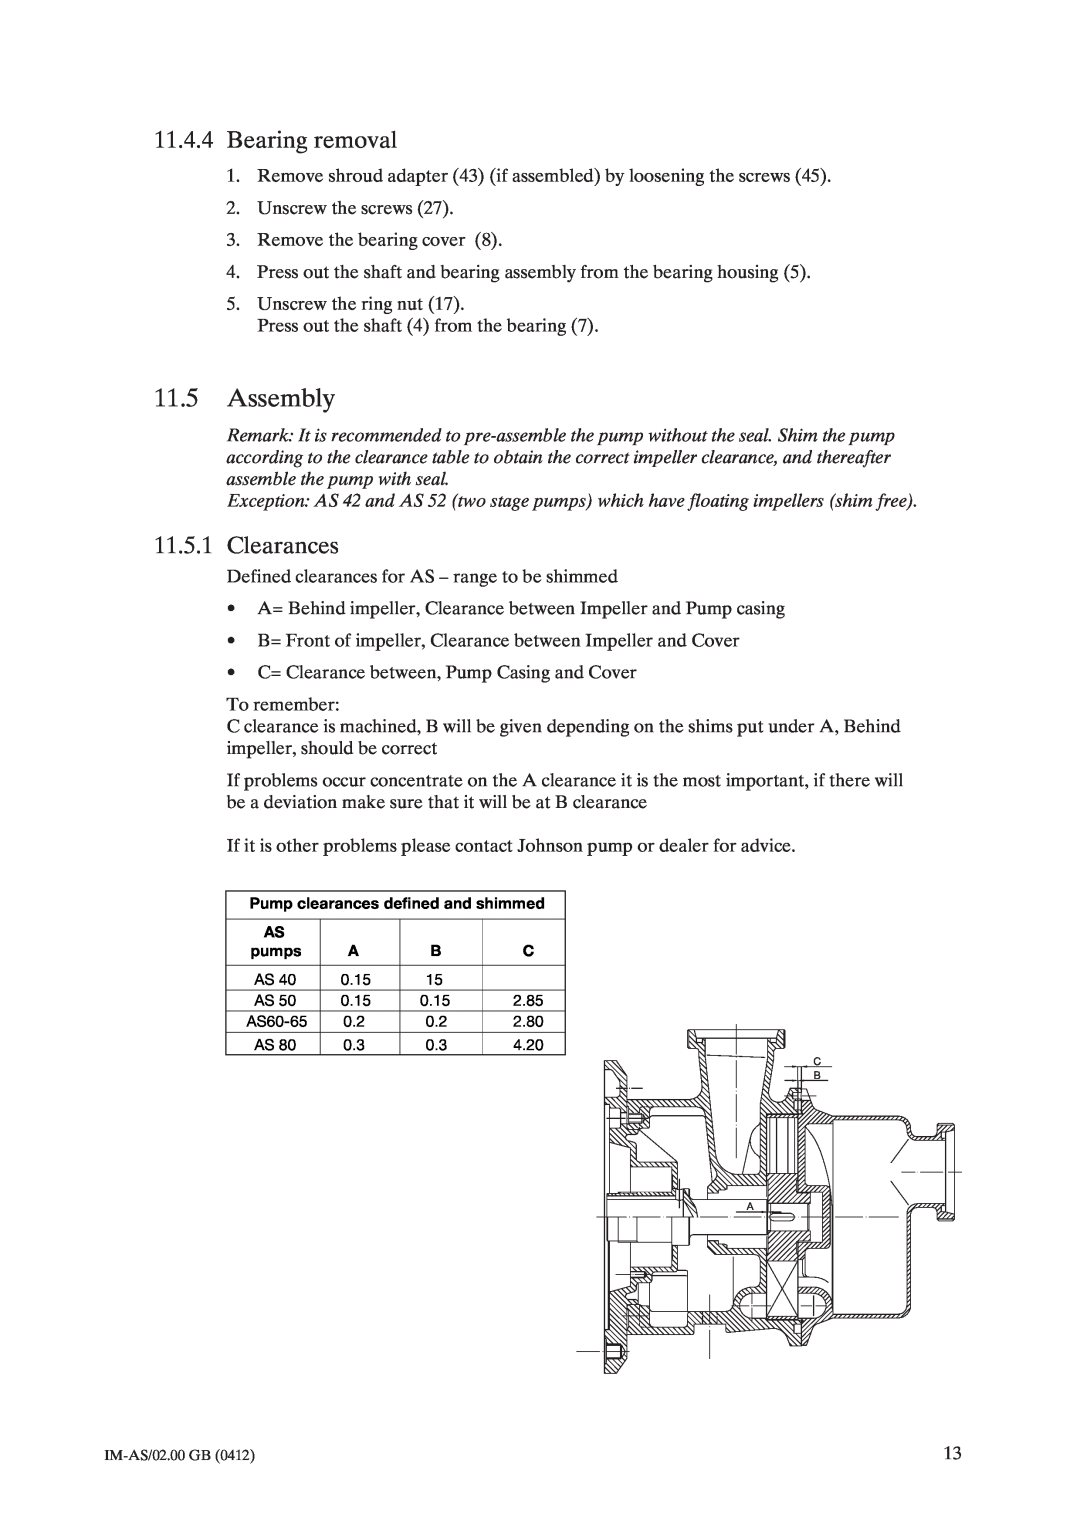 Johnson Controls AS instruction manual 11.5Assembly, 11.4.4Bearing removal, Clearances 